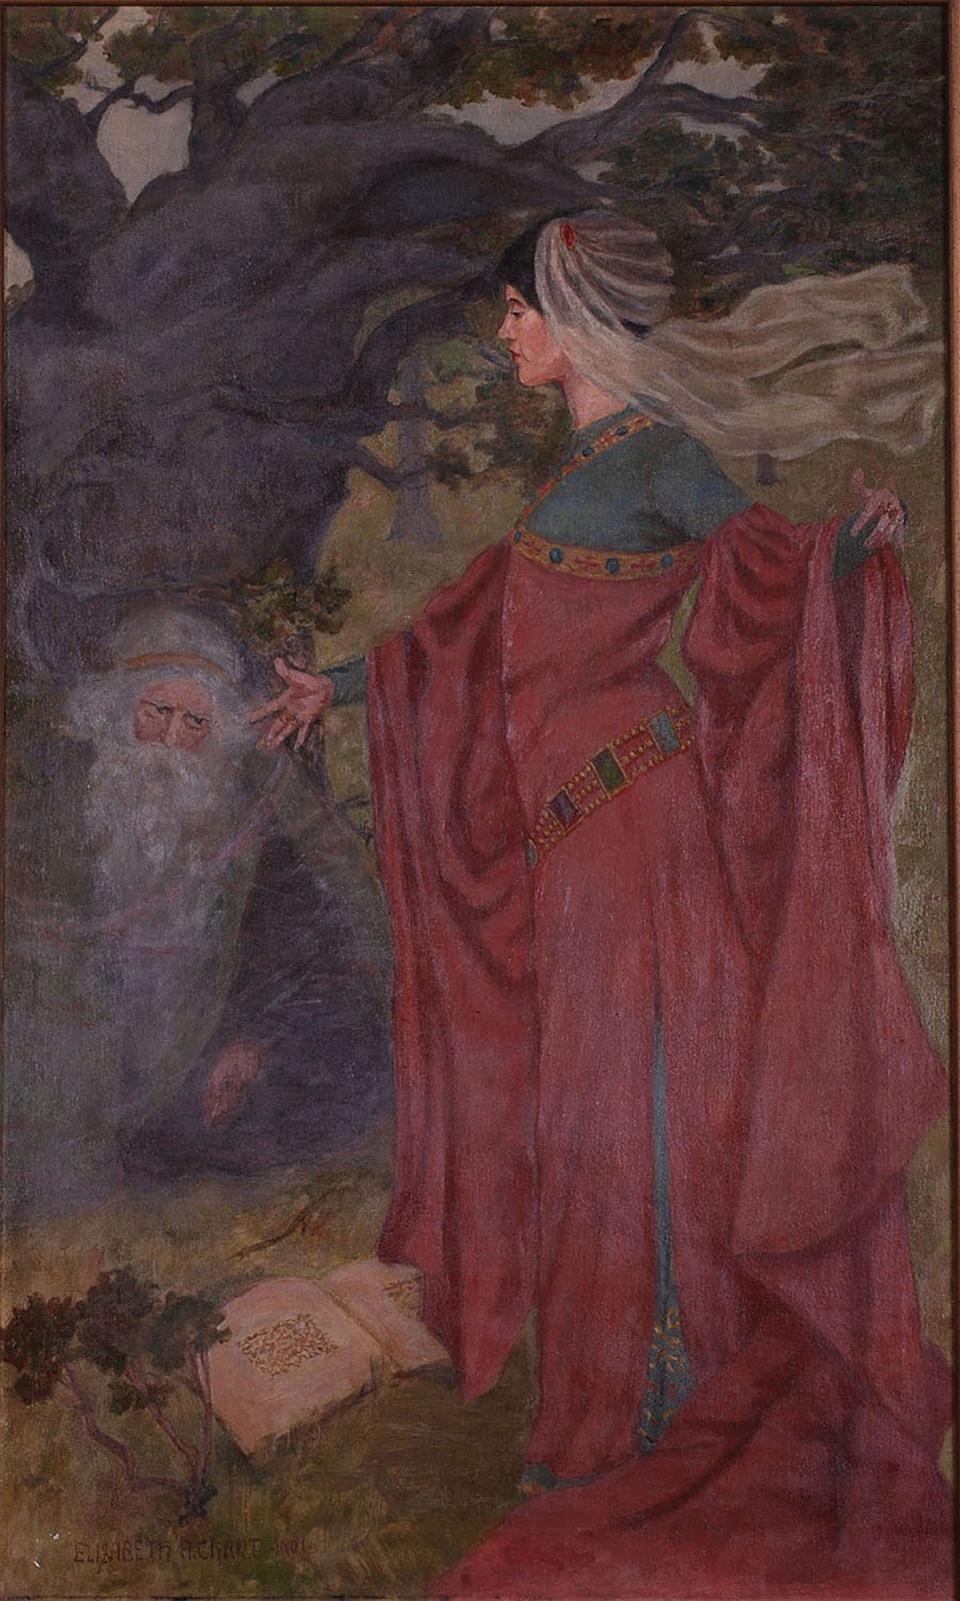 Elisabeth Chant's 1901, oil on board painting "Merlin and Guinevere, 1901."